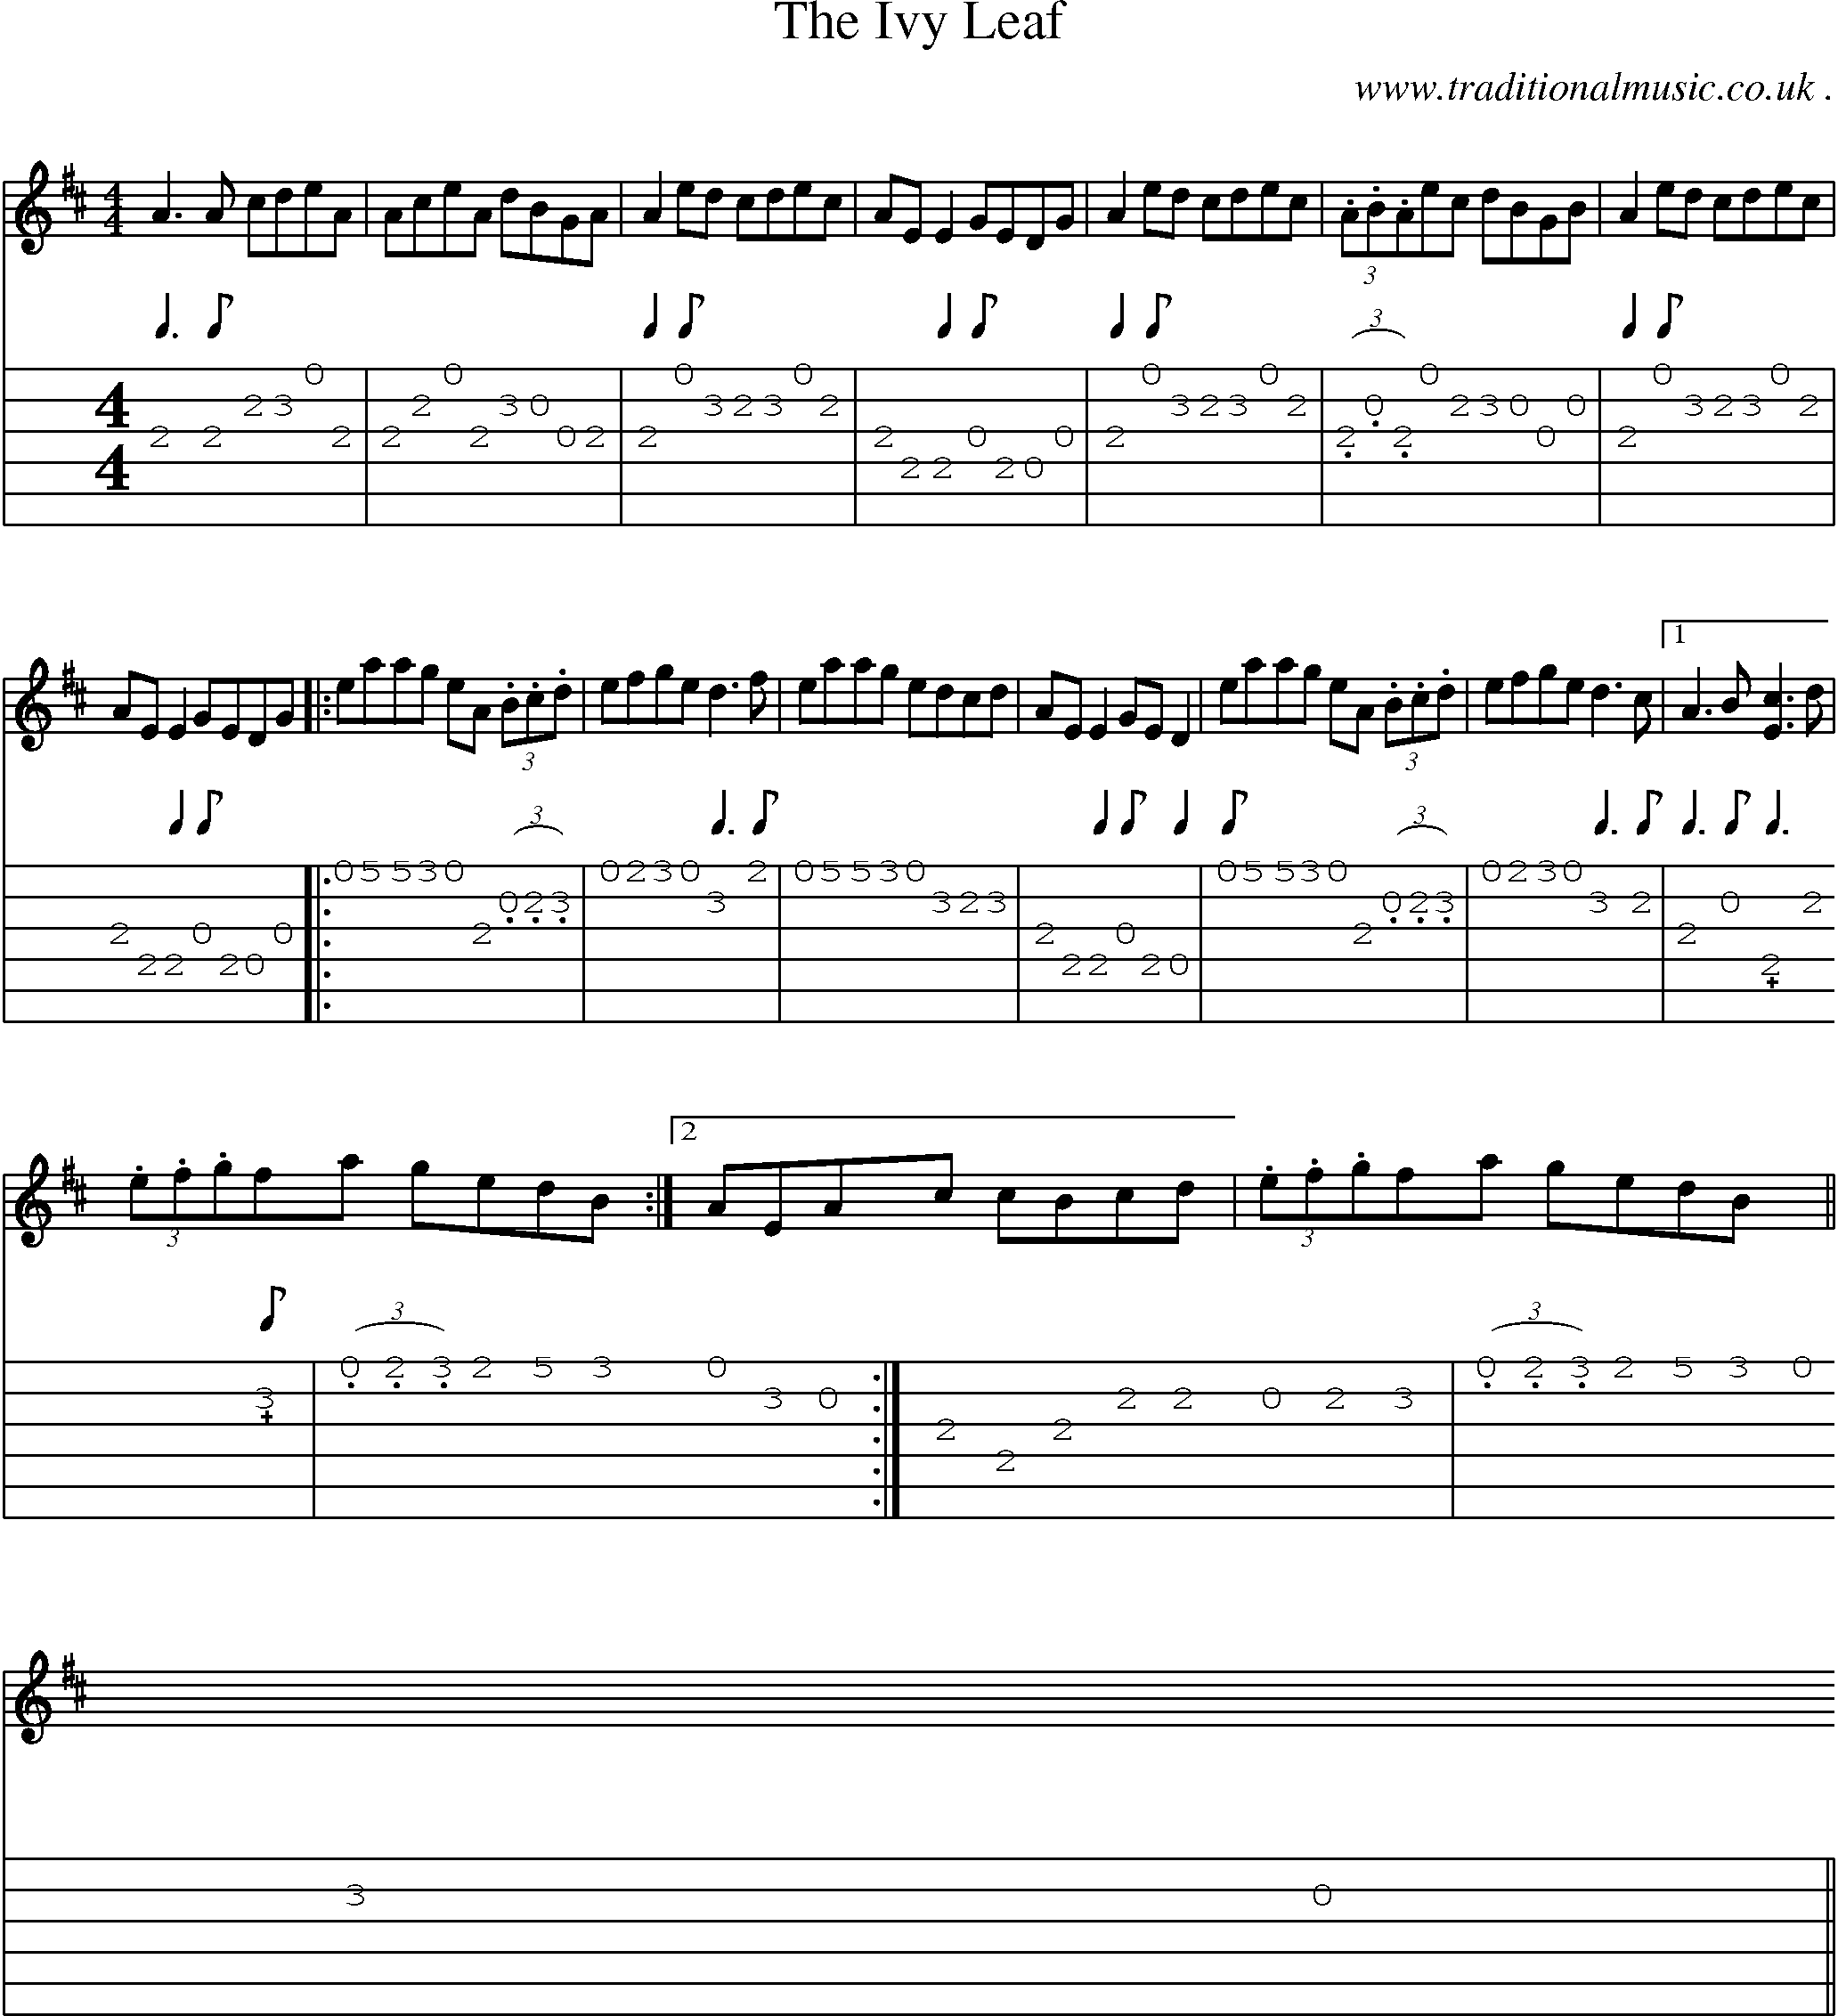 Sheet-Music and Guitar Tabs for The Ivy Leaf